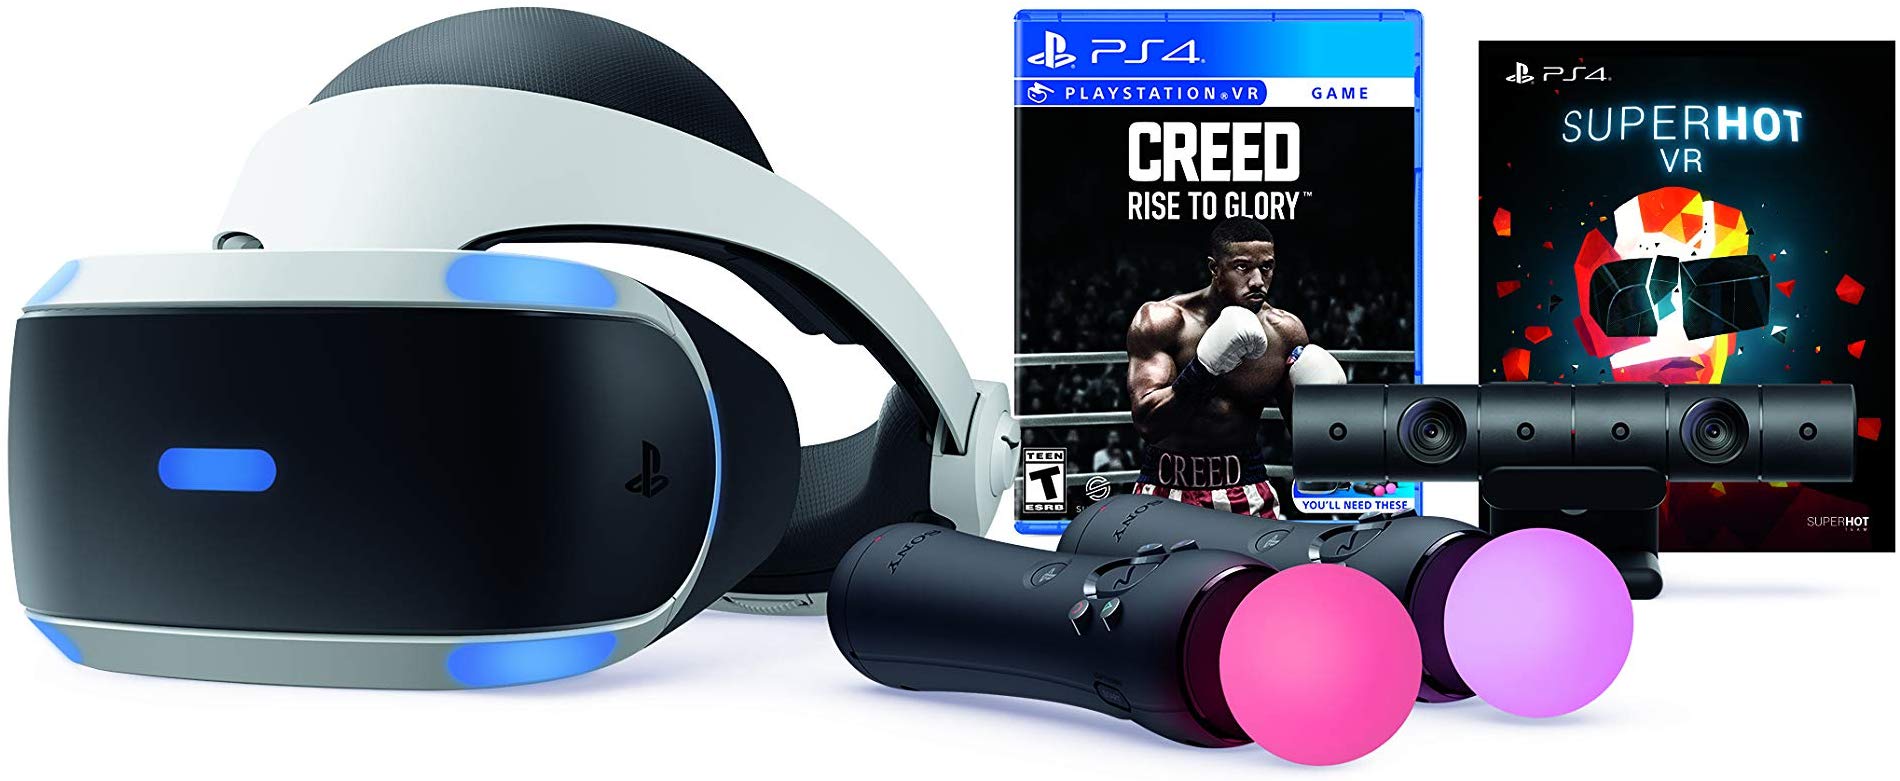 PSVR deal has PlayStation Move and 2 games, and it's $100 off at Amazon GamesRadar+